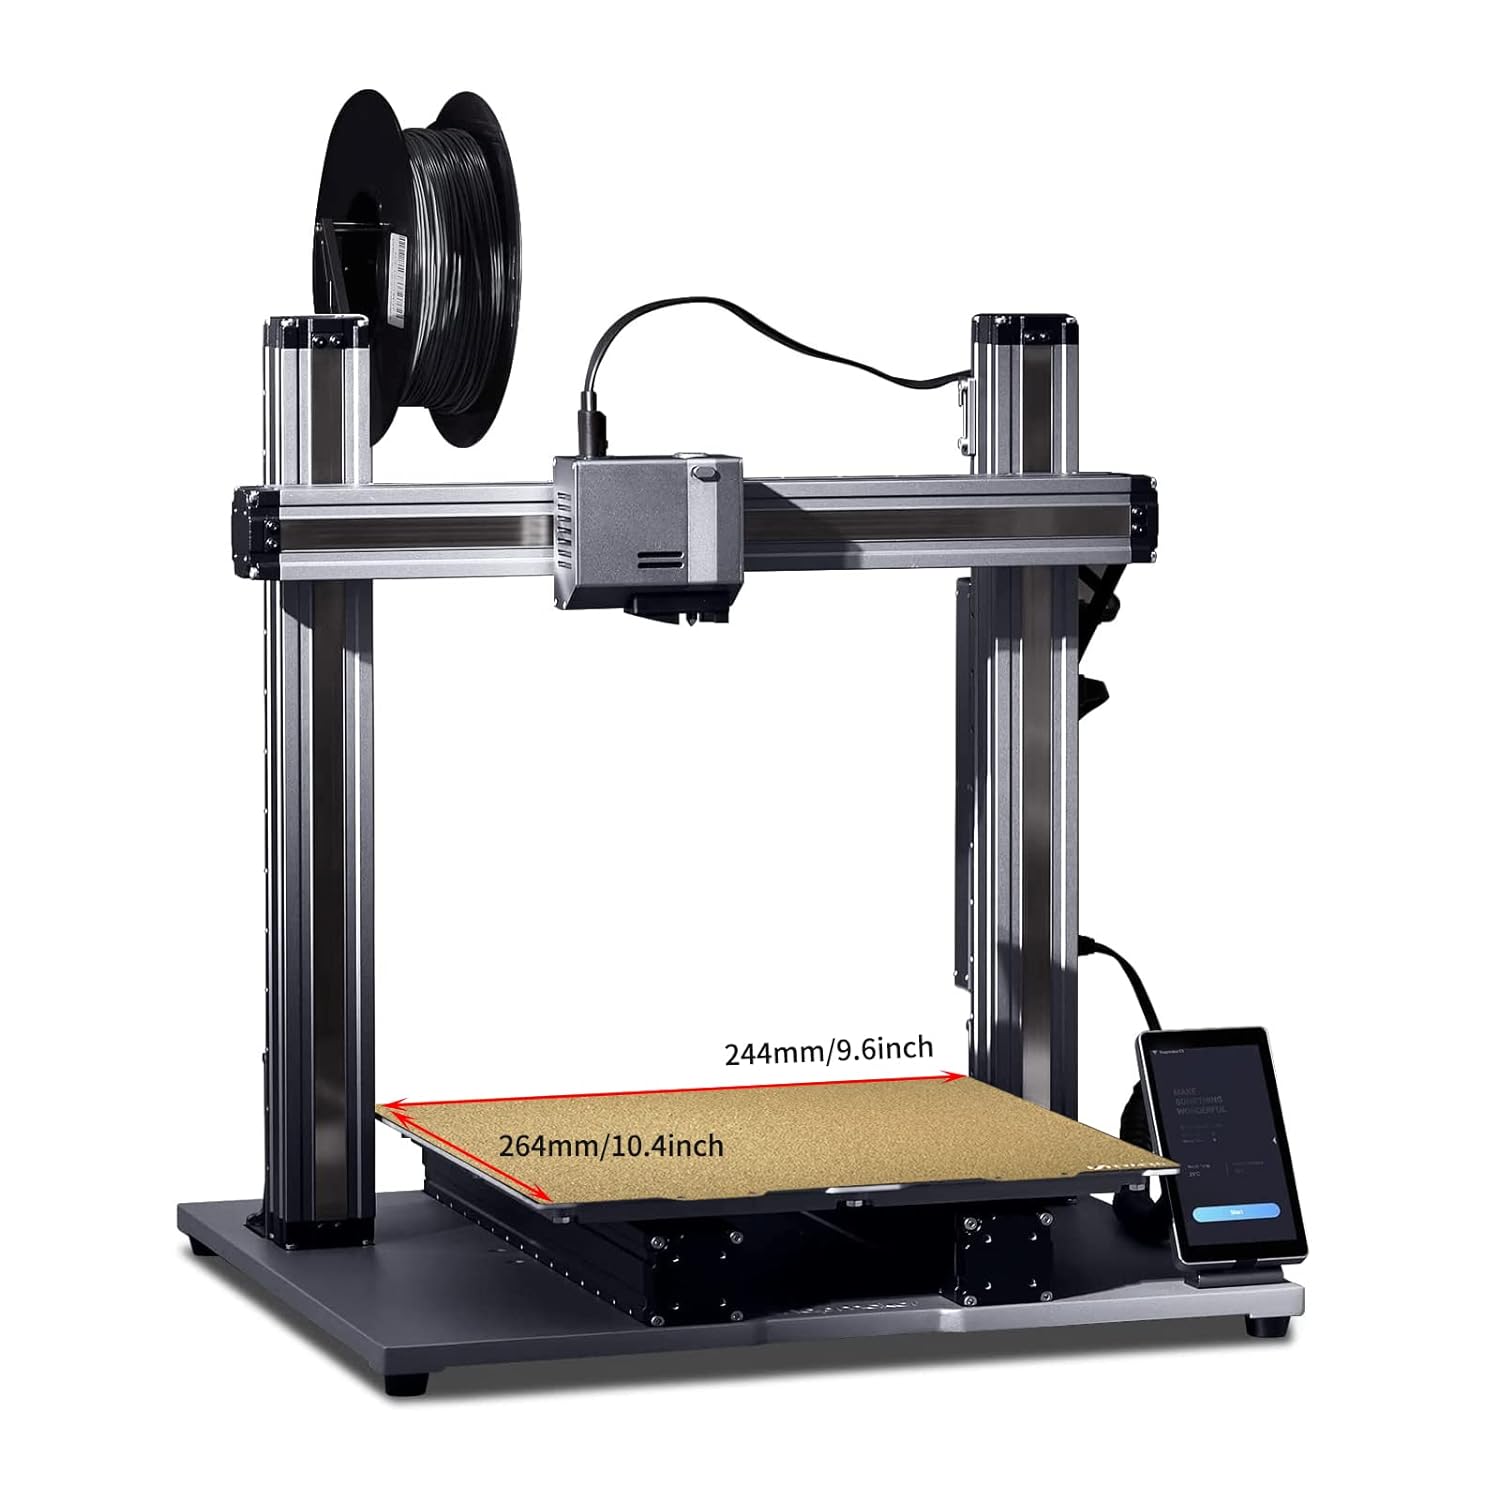 FYSETC 3D Printer Accessories SnapmakerA250T A250 Printing Platform: Smooth PEI - Textured Build Plate Heated Bed Surface with Sticker Adhesive 244x264mm/9.6x10.4inch¡­